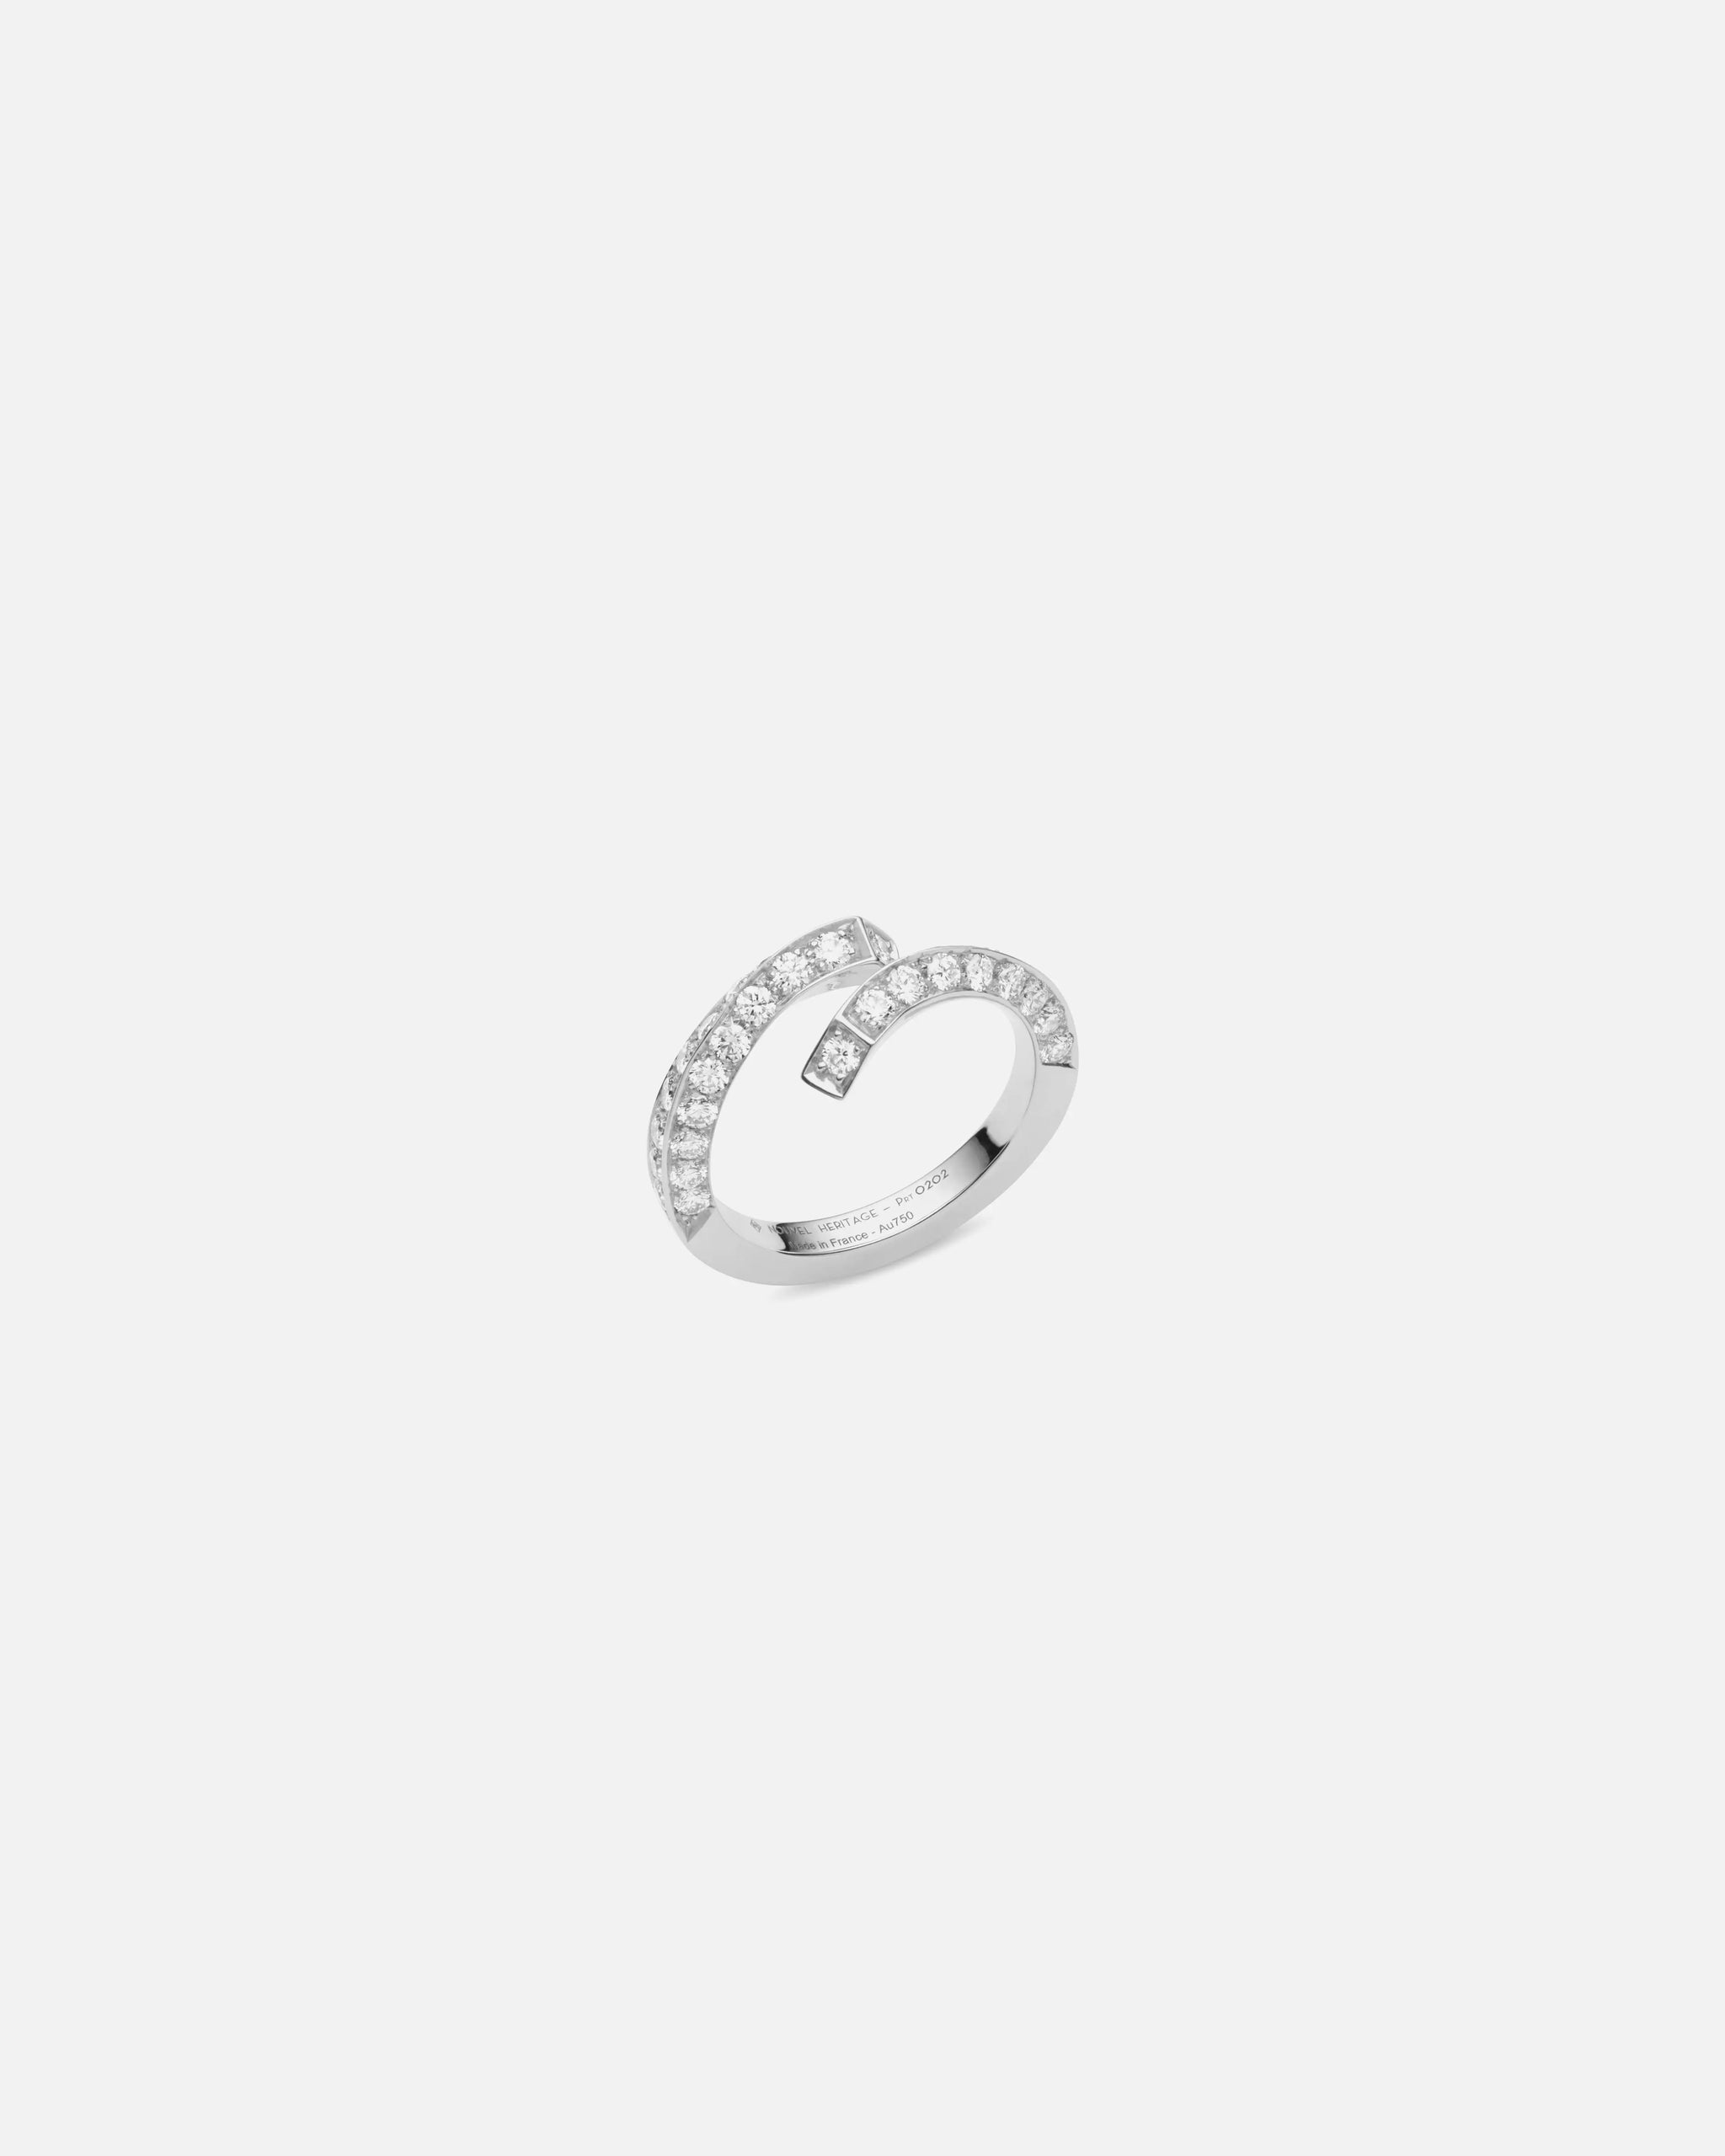 Diamond Thread Ring in White Gold - 1 - Nouvel Heritage